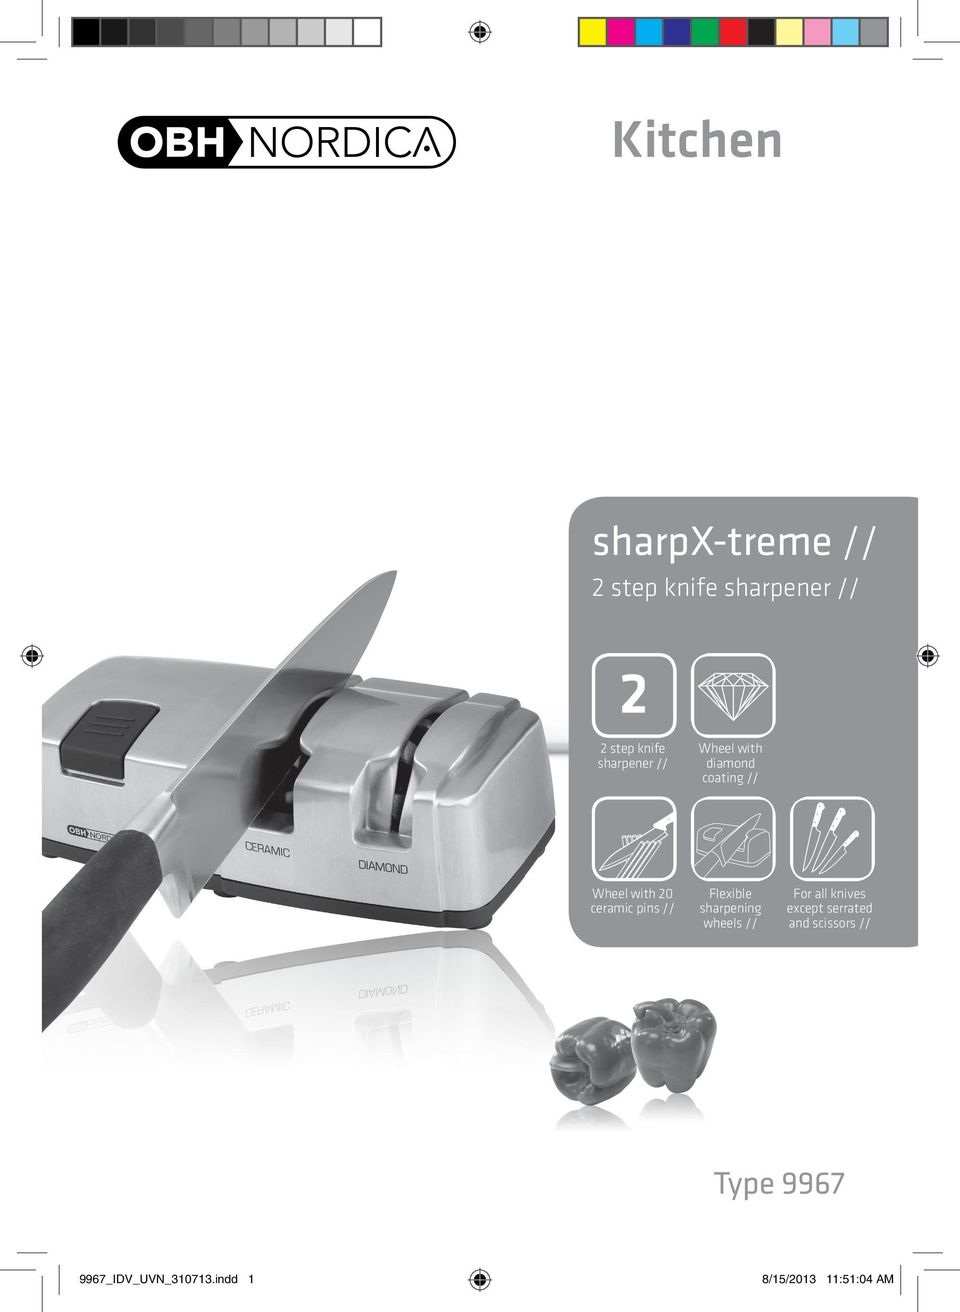 pins // Flexible sharpening wheels // For all knives except